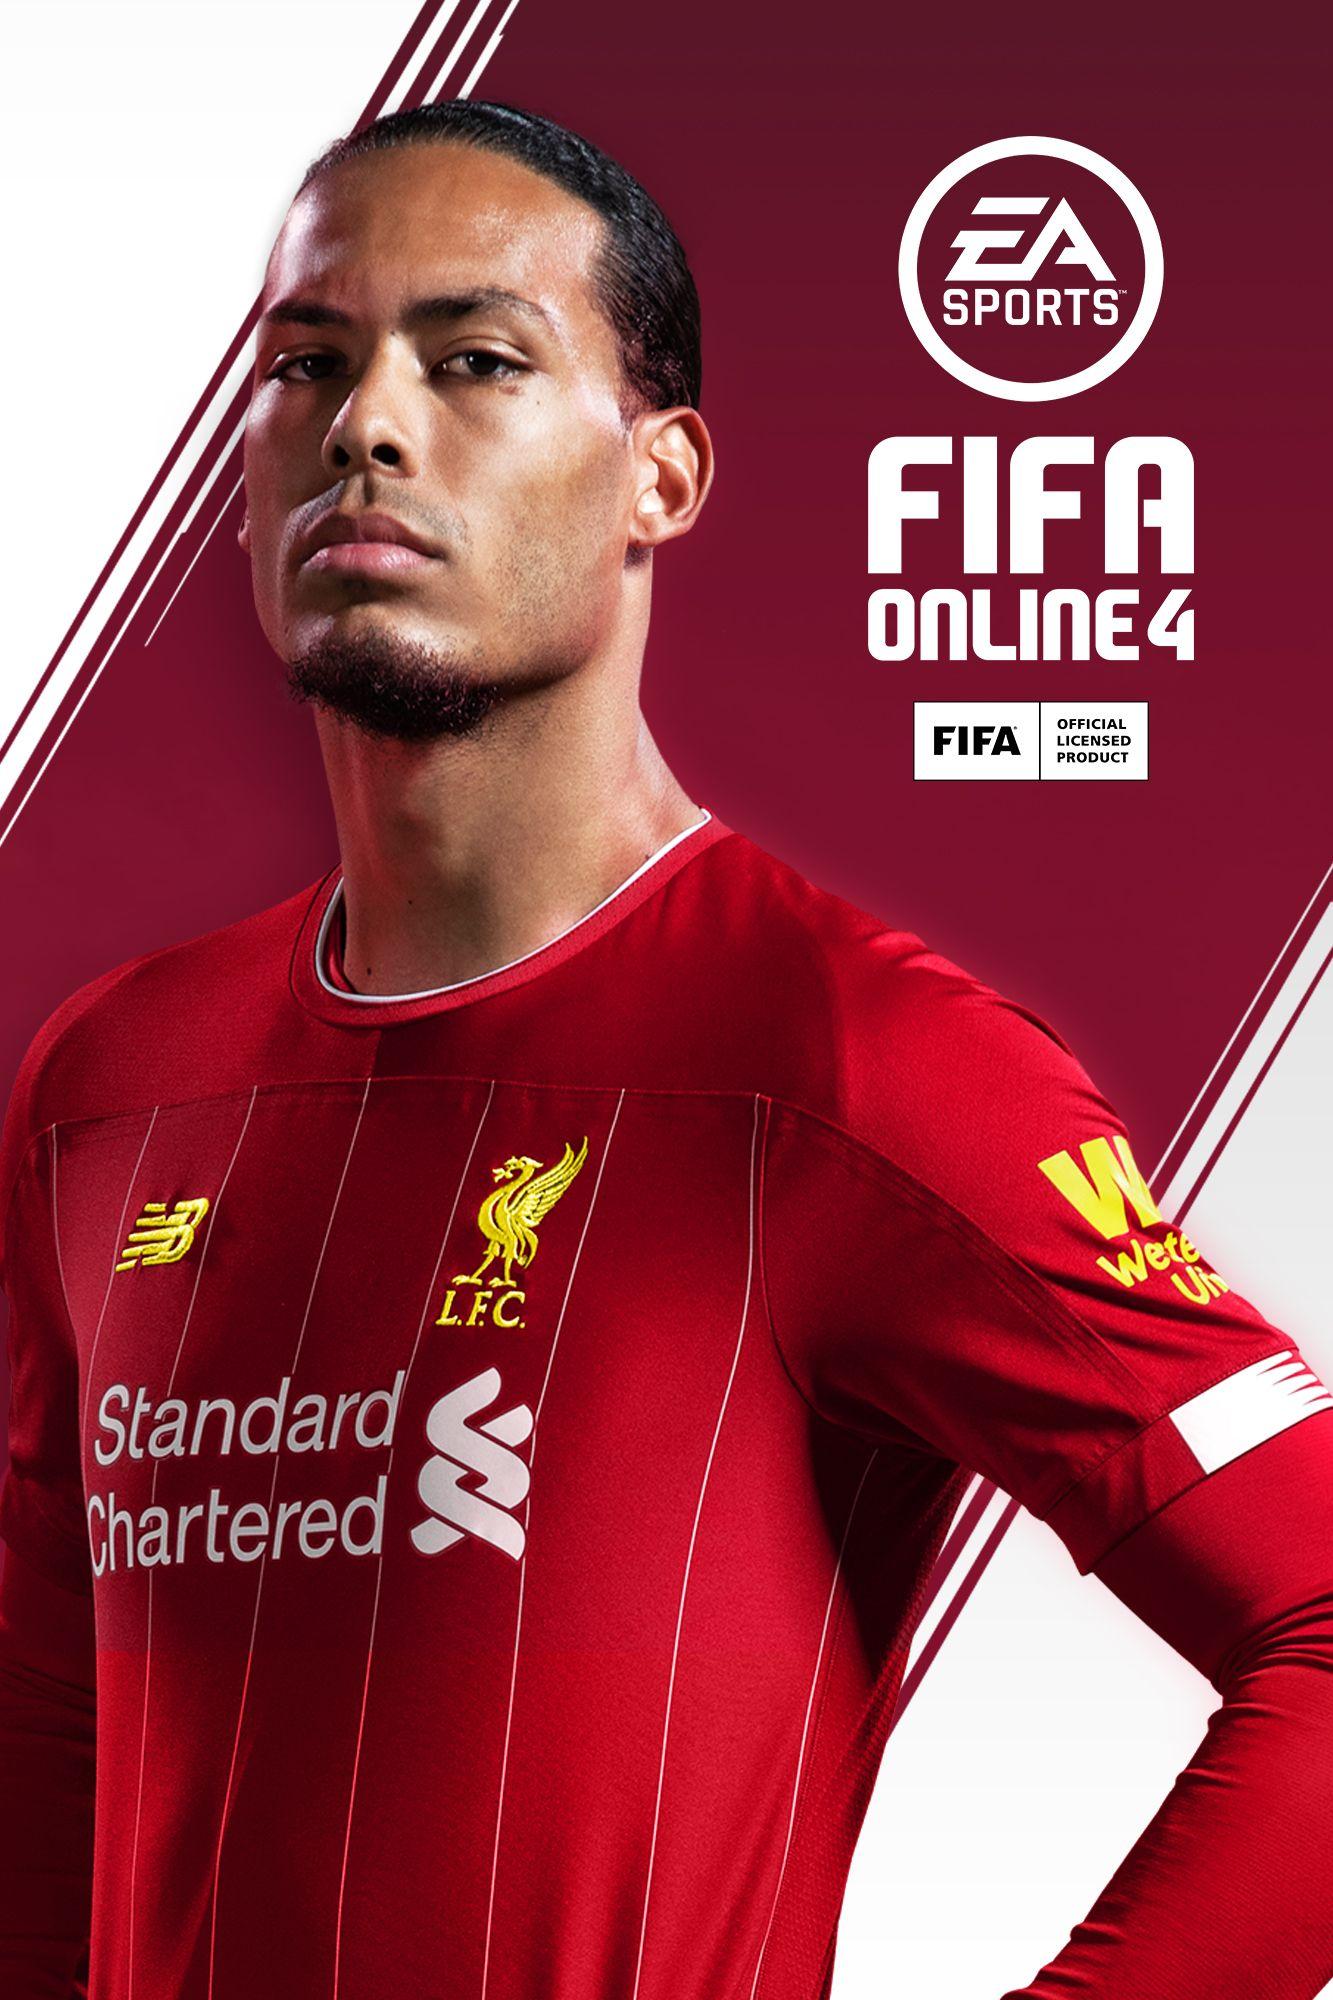 FIFA Online 4 Wallpapers - Top Free FIFA Online 4 Backgrounds